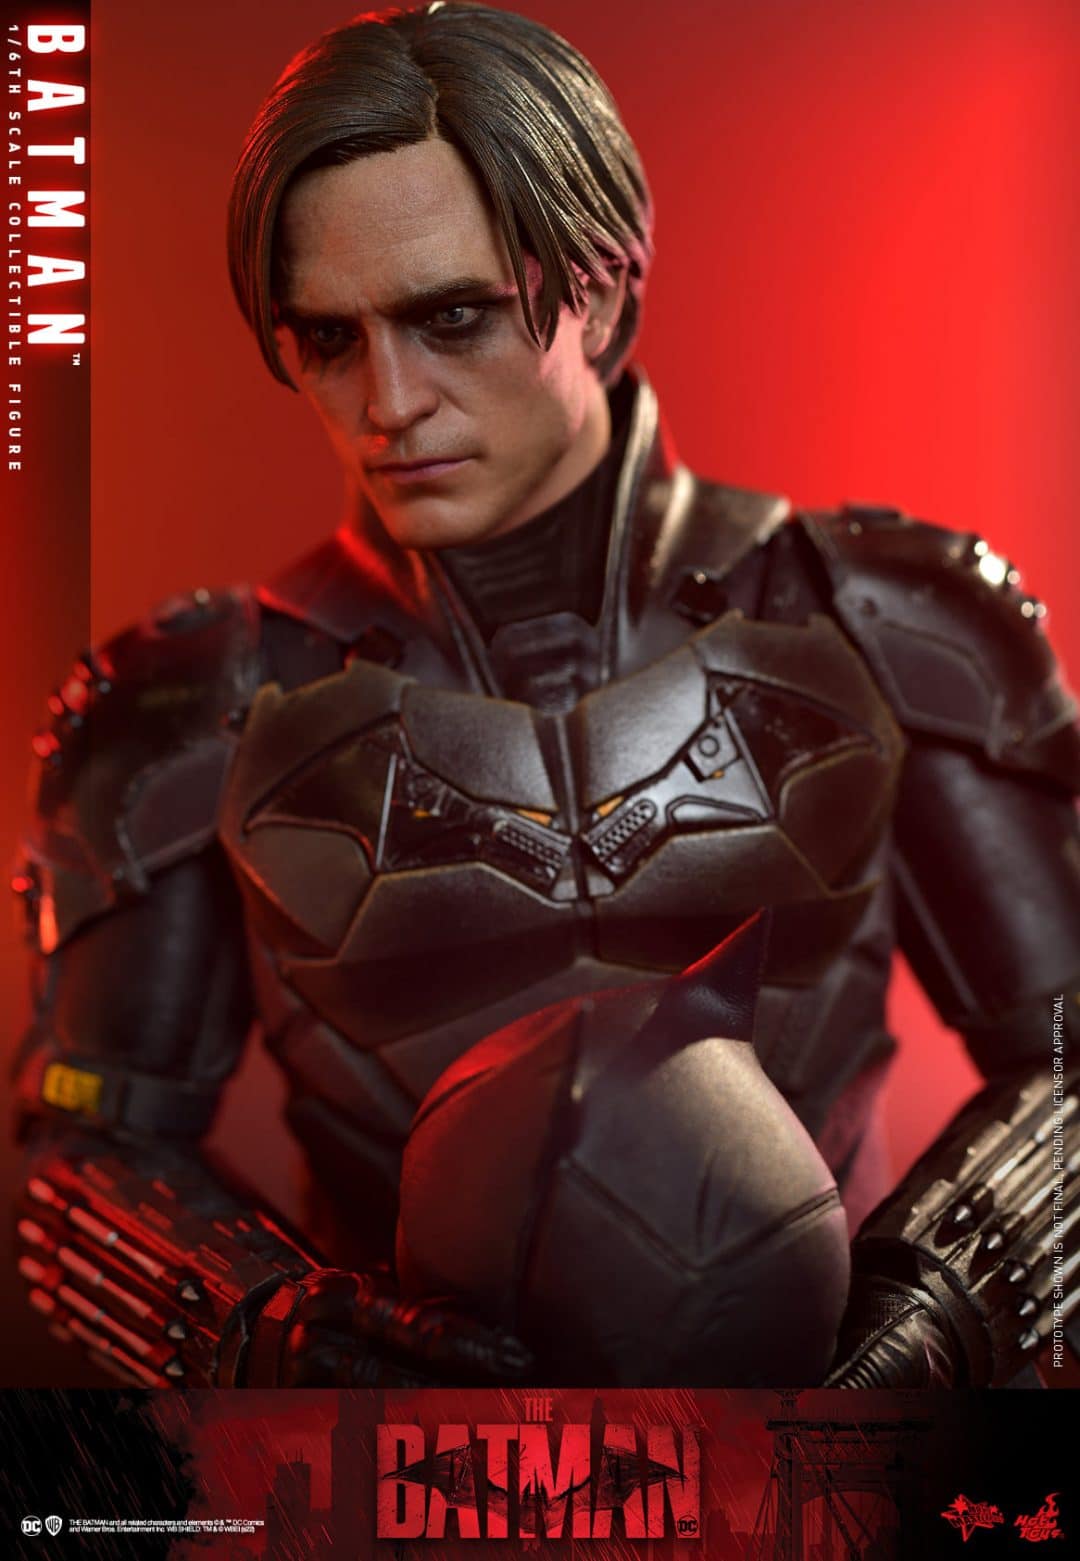 Hot Toys: The Batman Collector Edition & Deluxe Version Figures ...